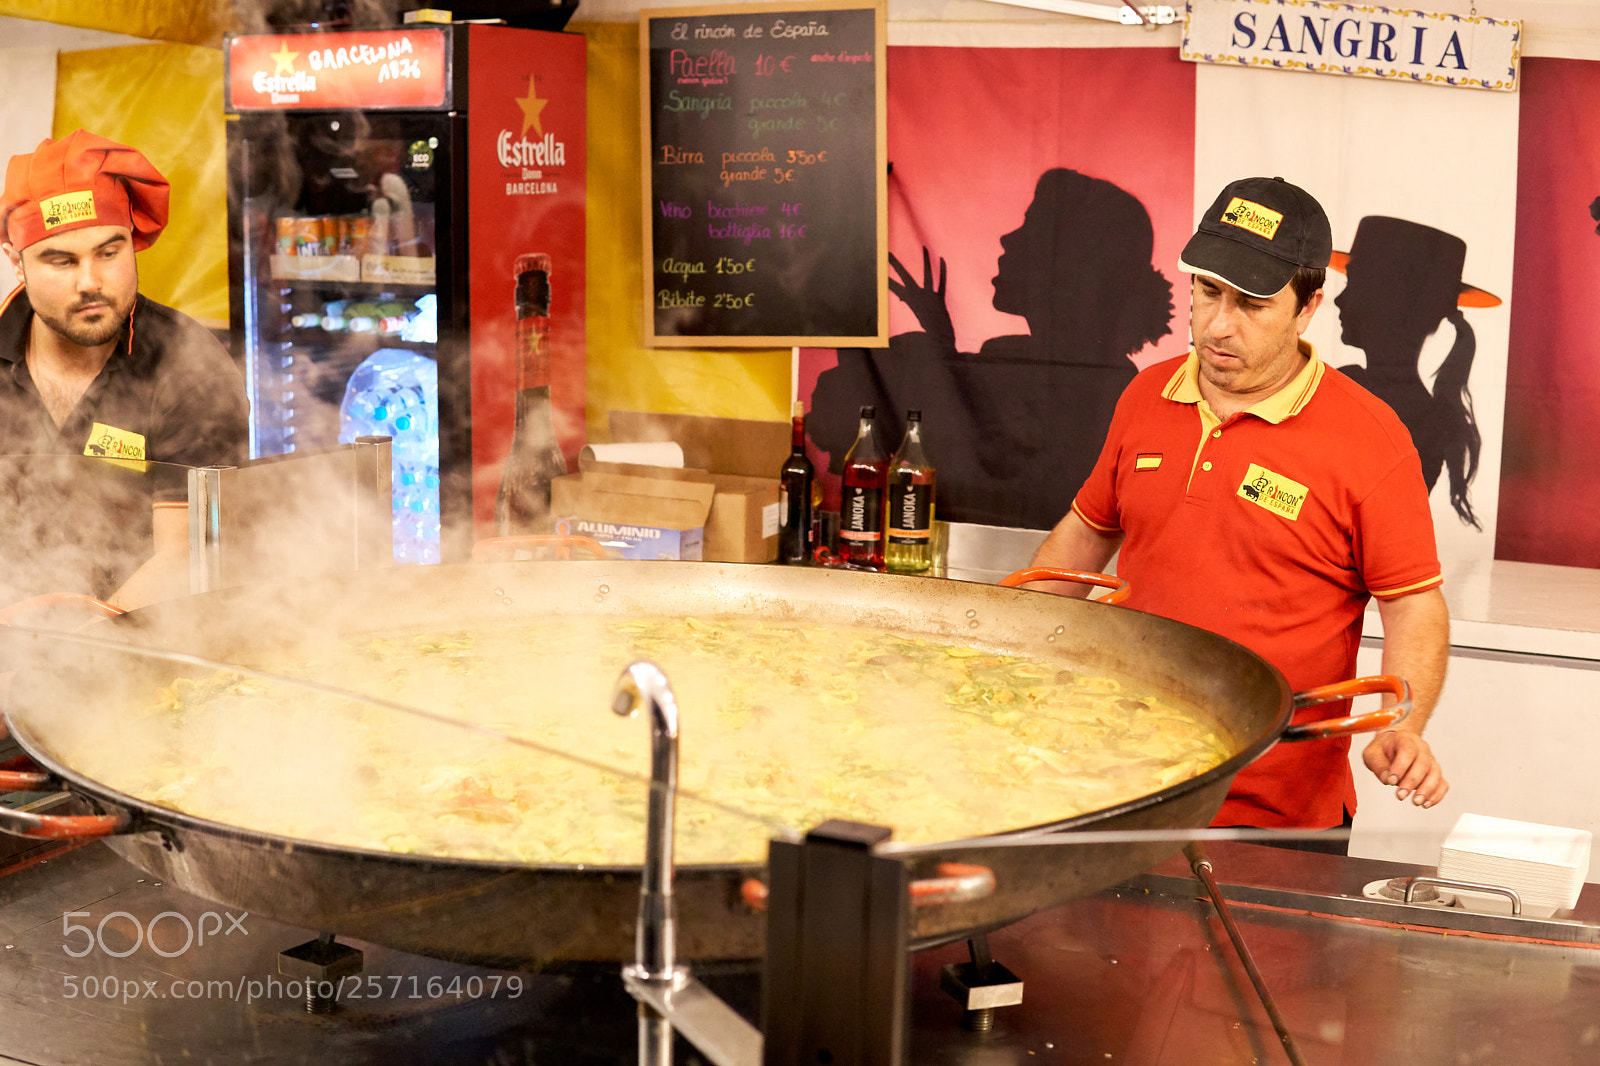 Sony a6300 sample photo. Cooking paella photography